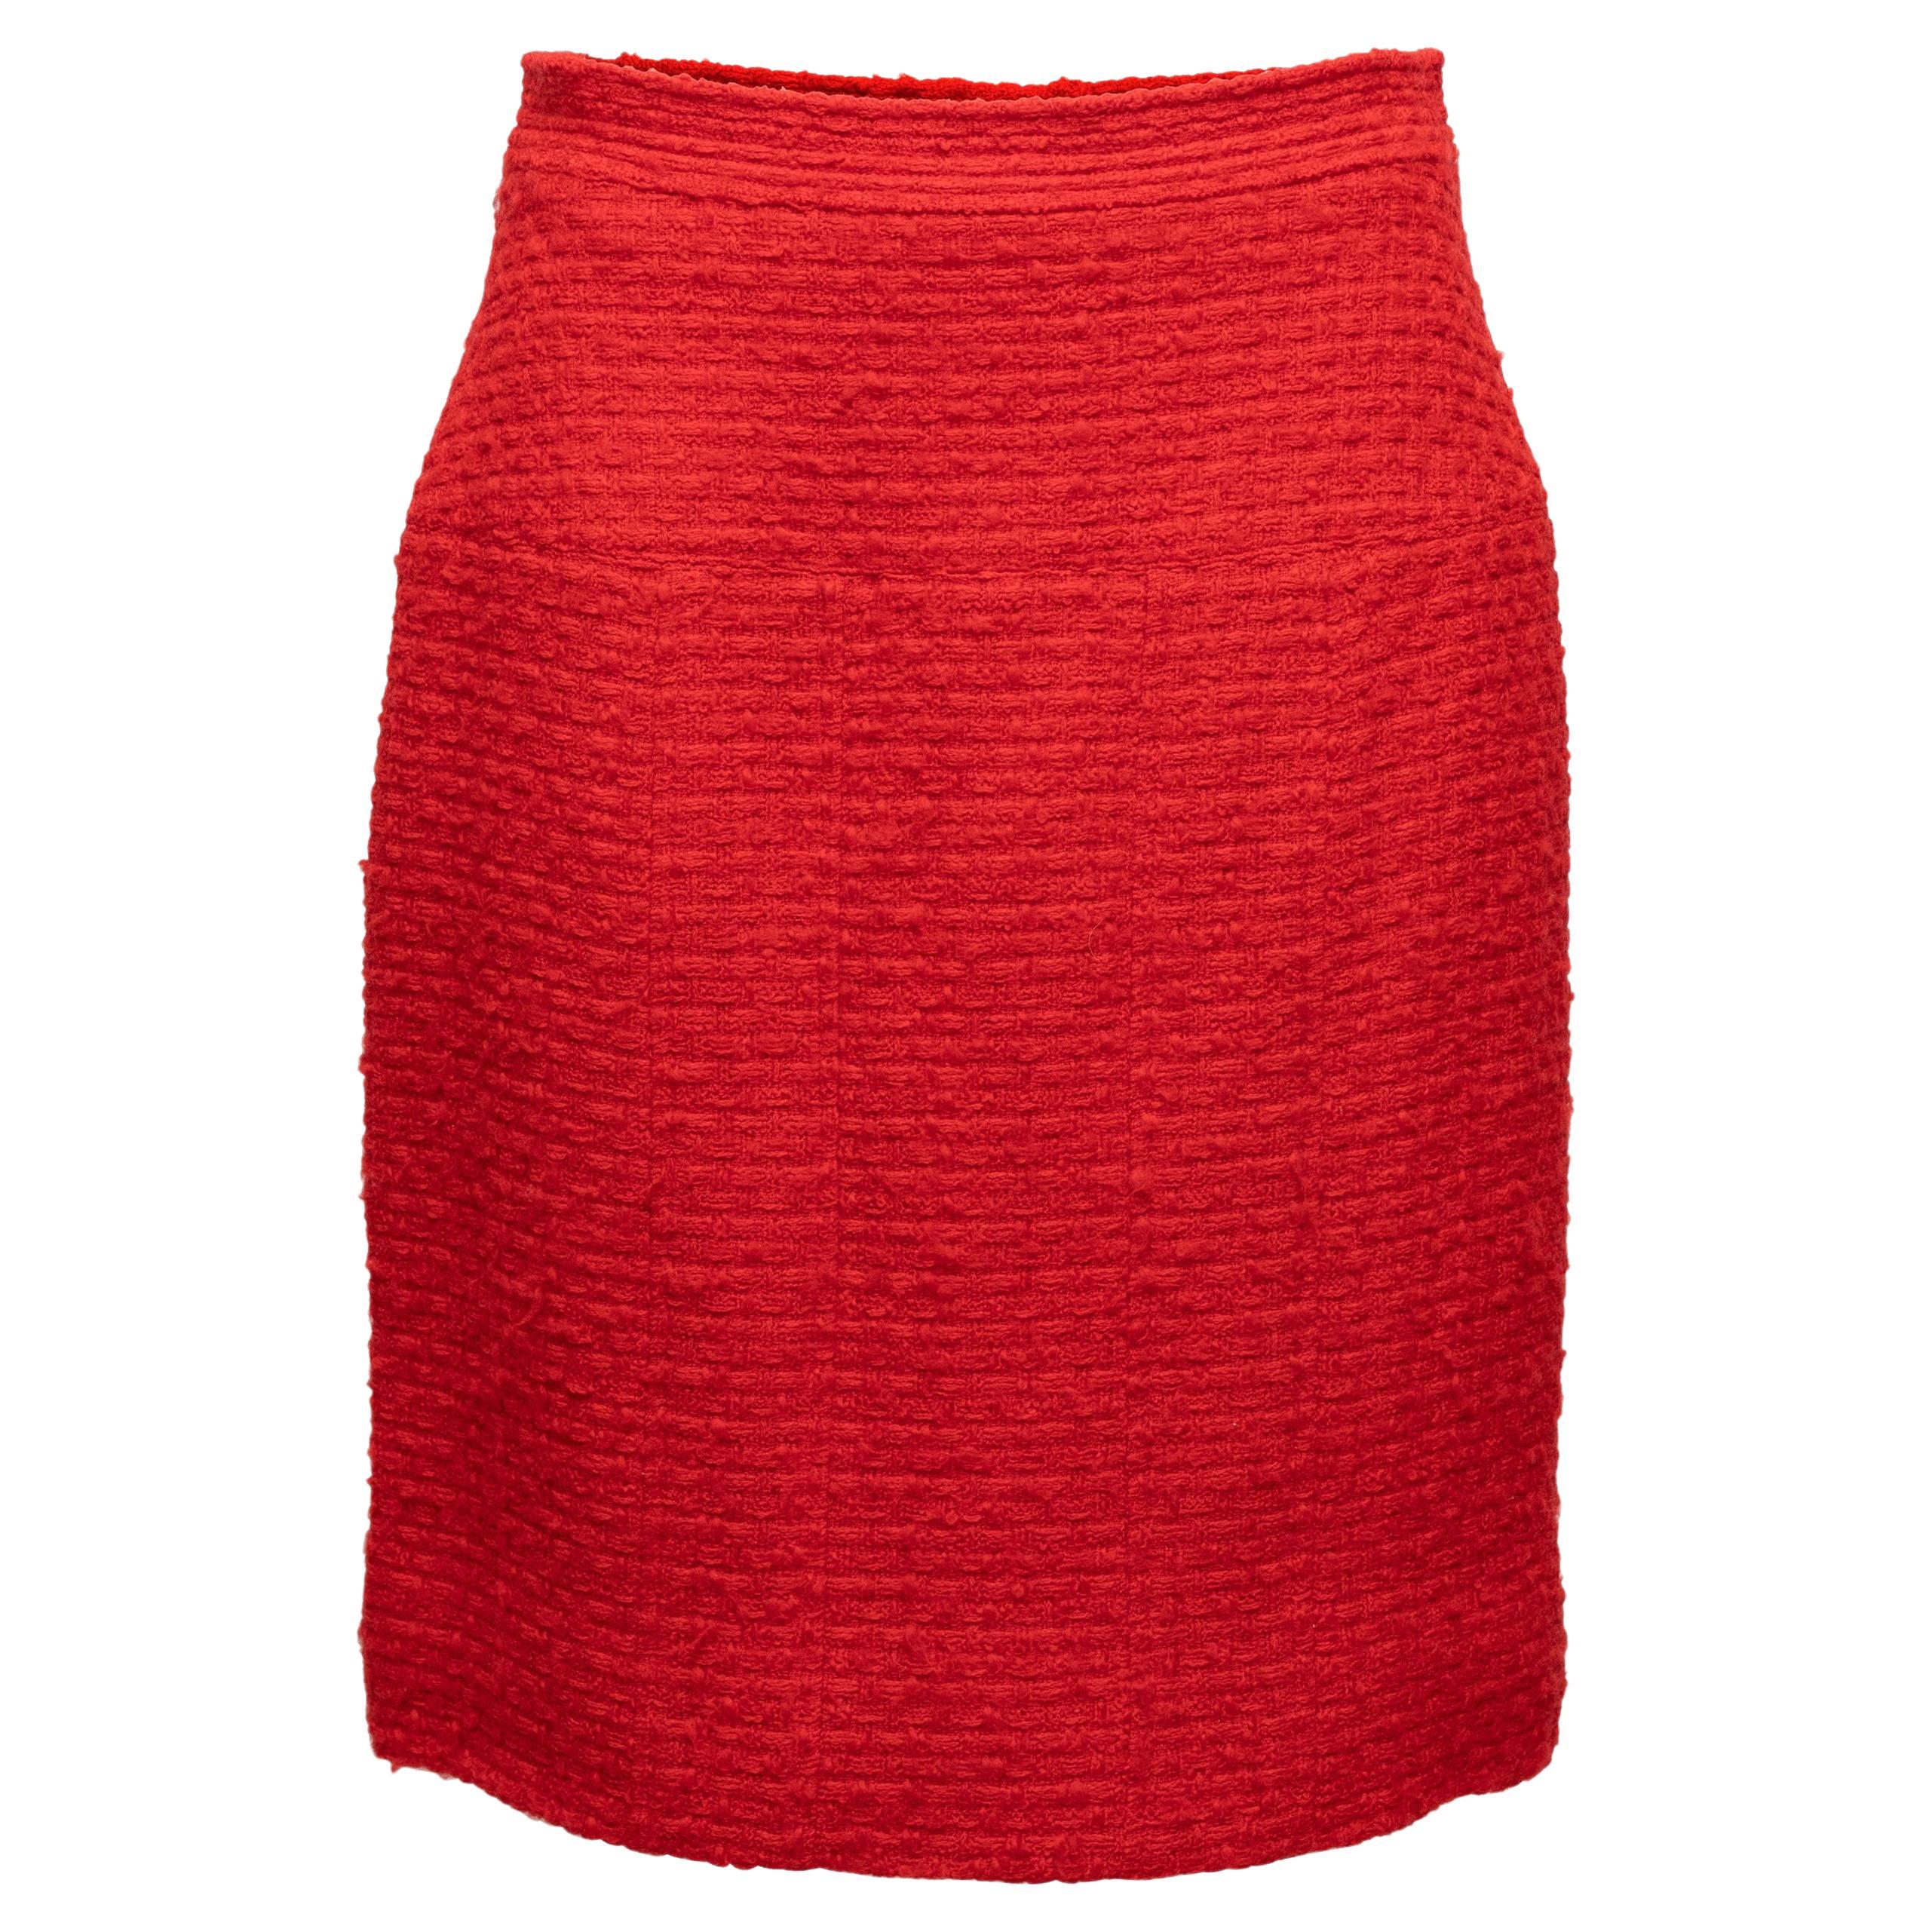 Chanel Red Boutique Tweed Pencil Skirt